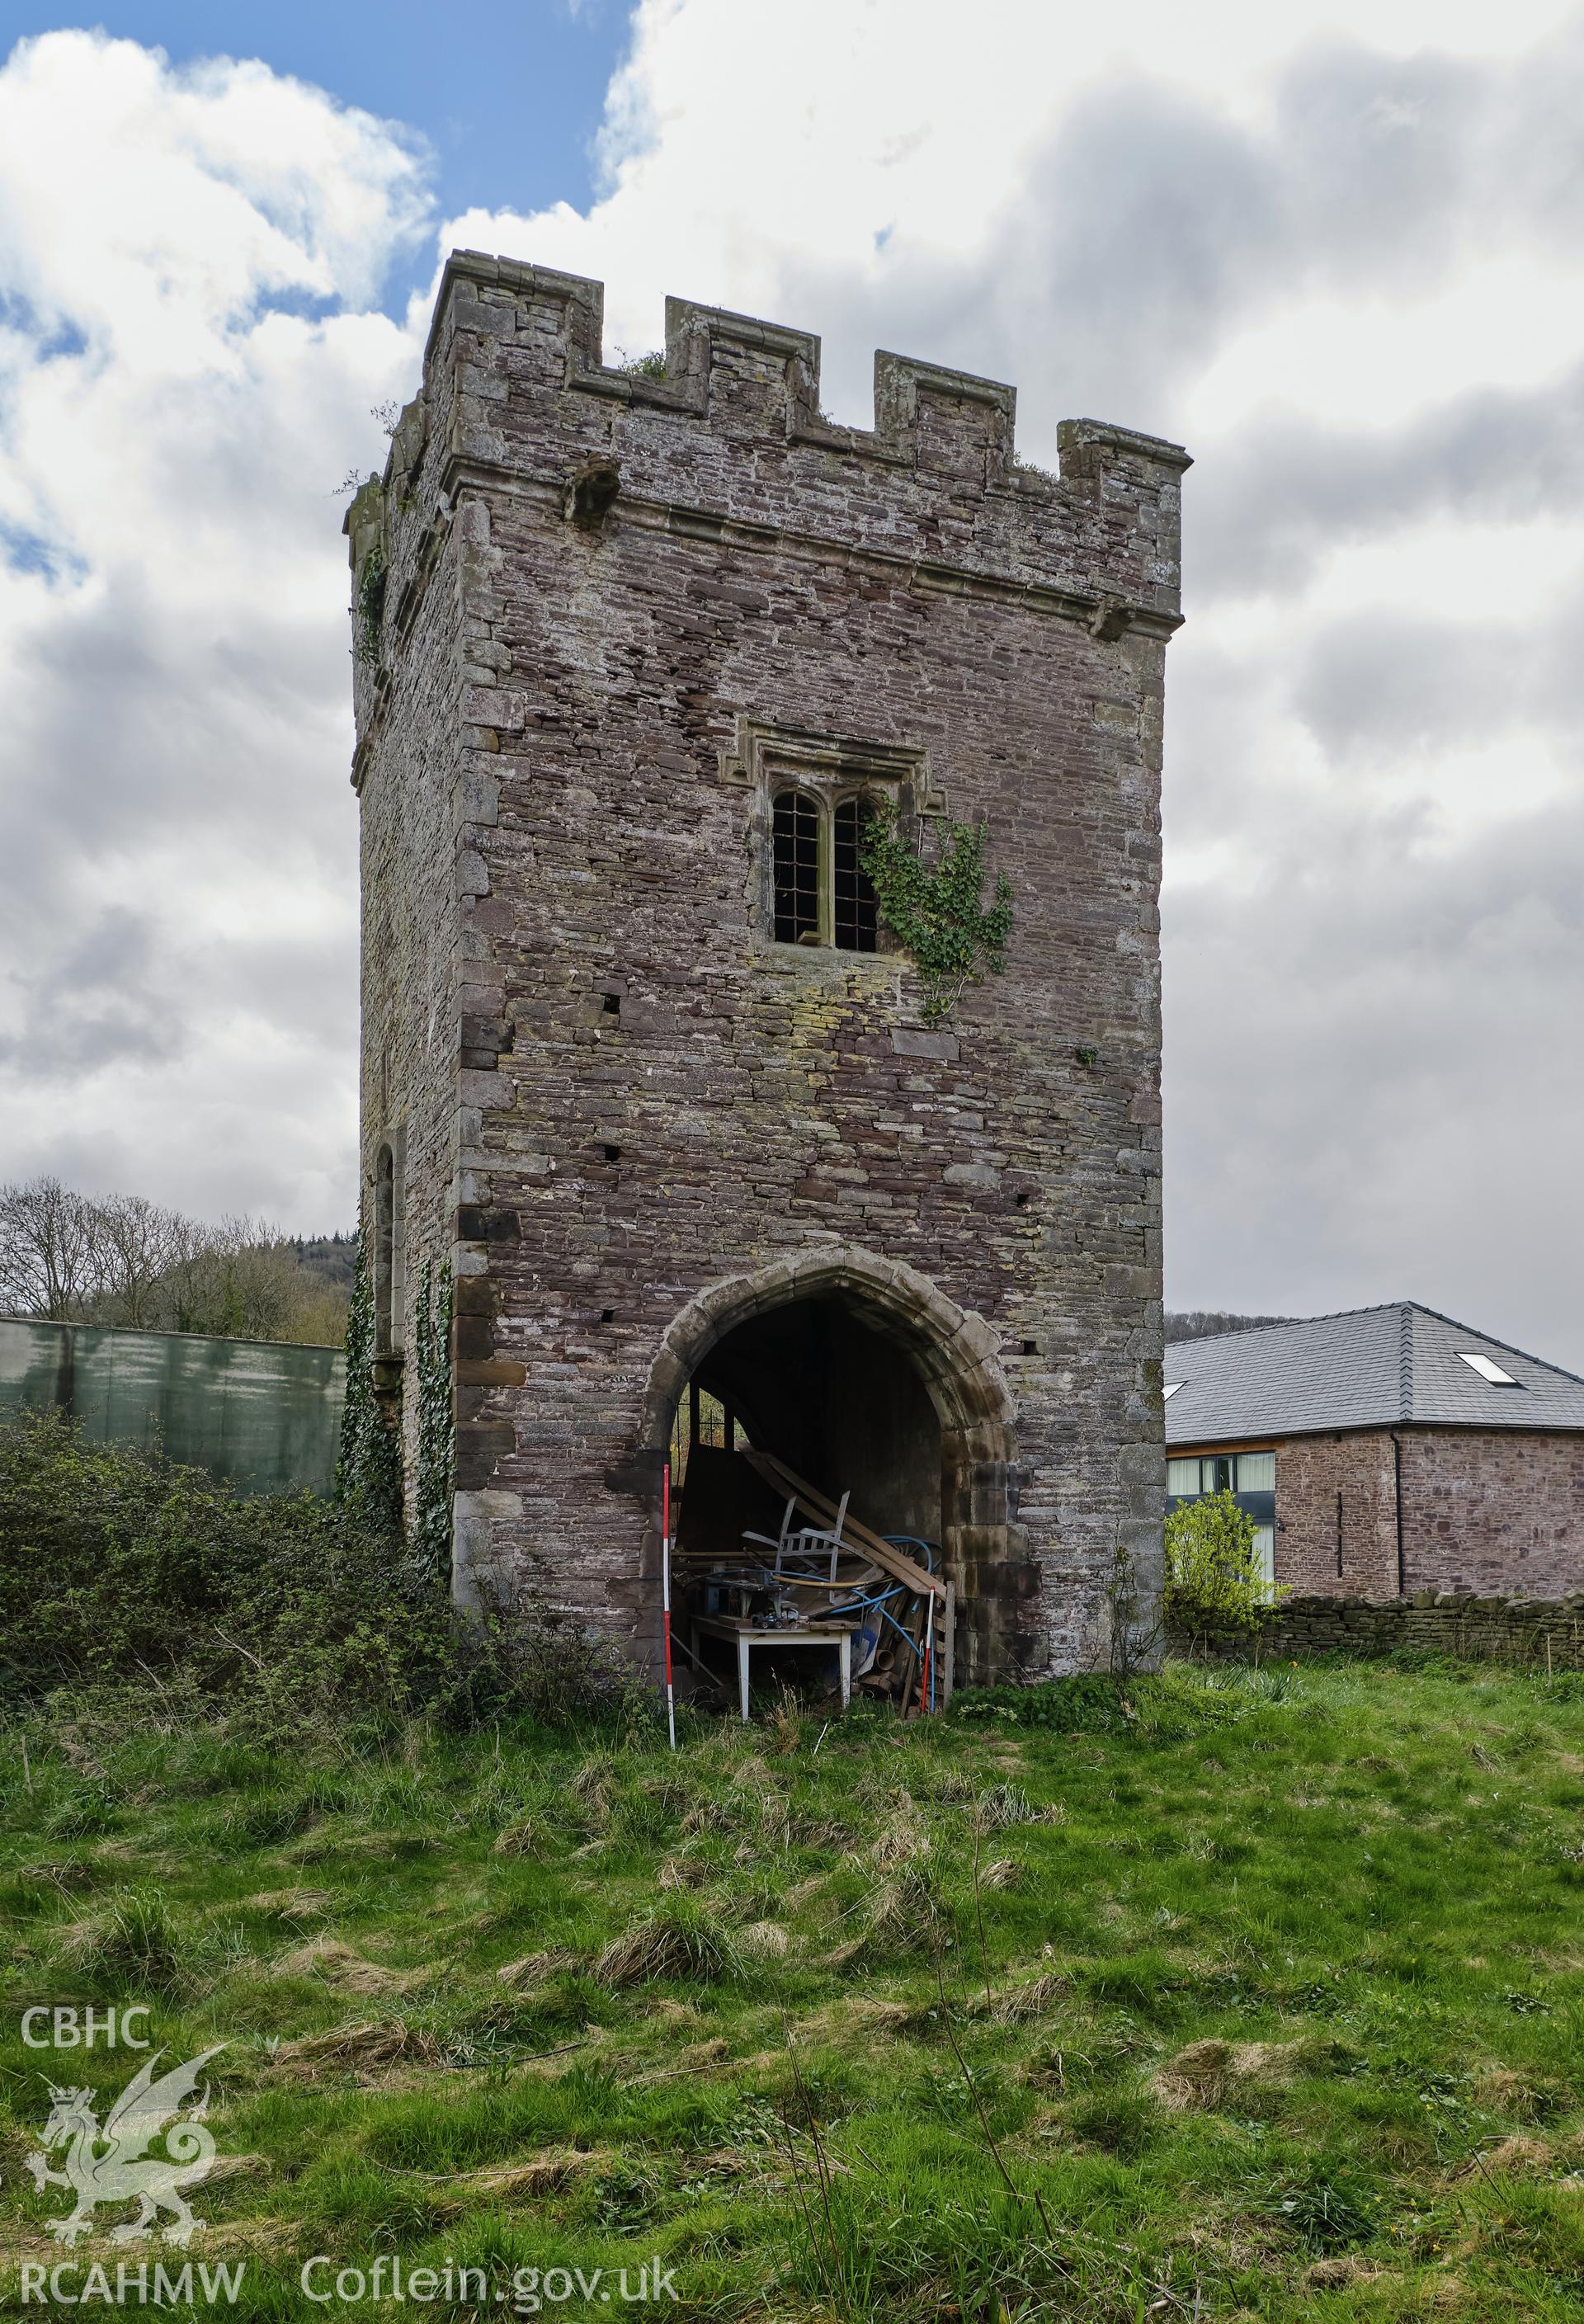 Colour photograph showing Great Porthmel Gatehouse - NW front, looking SE. Produced as part of Historic Building Recording for Great Porthamel Gatehouse, carried out by Richard Hayman, April 2021.